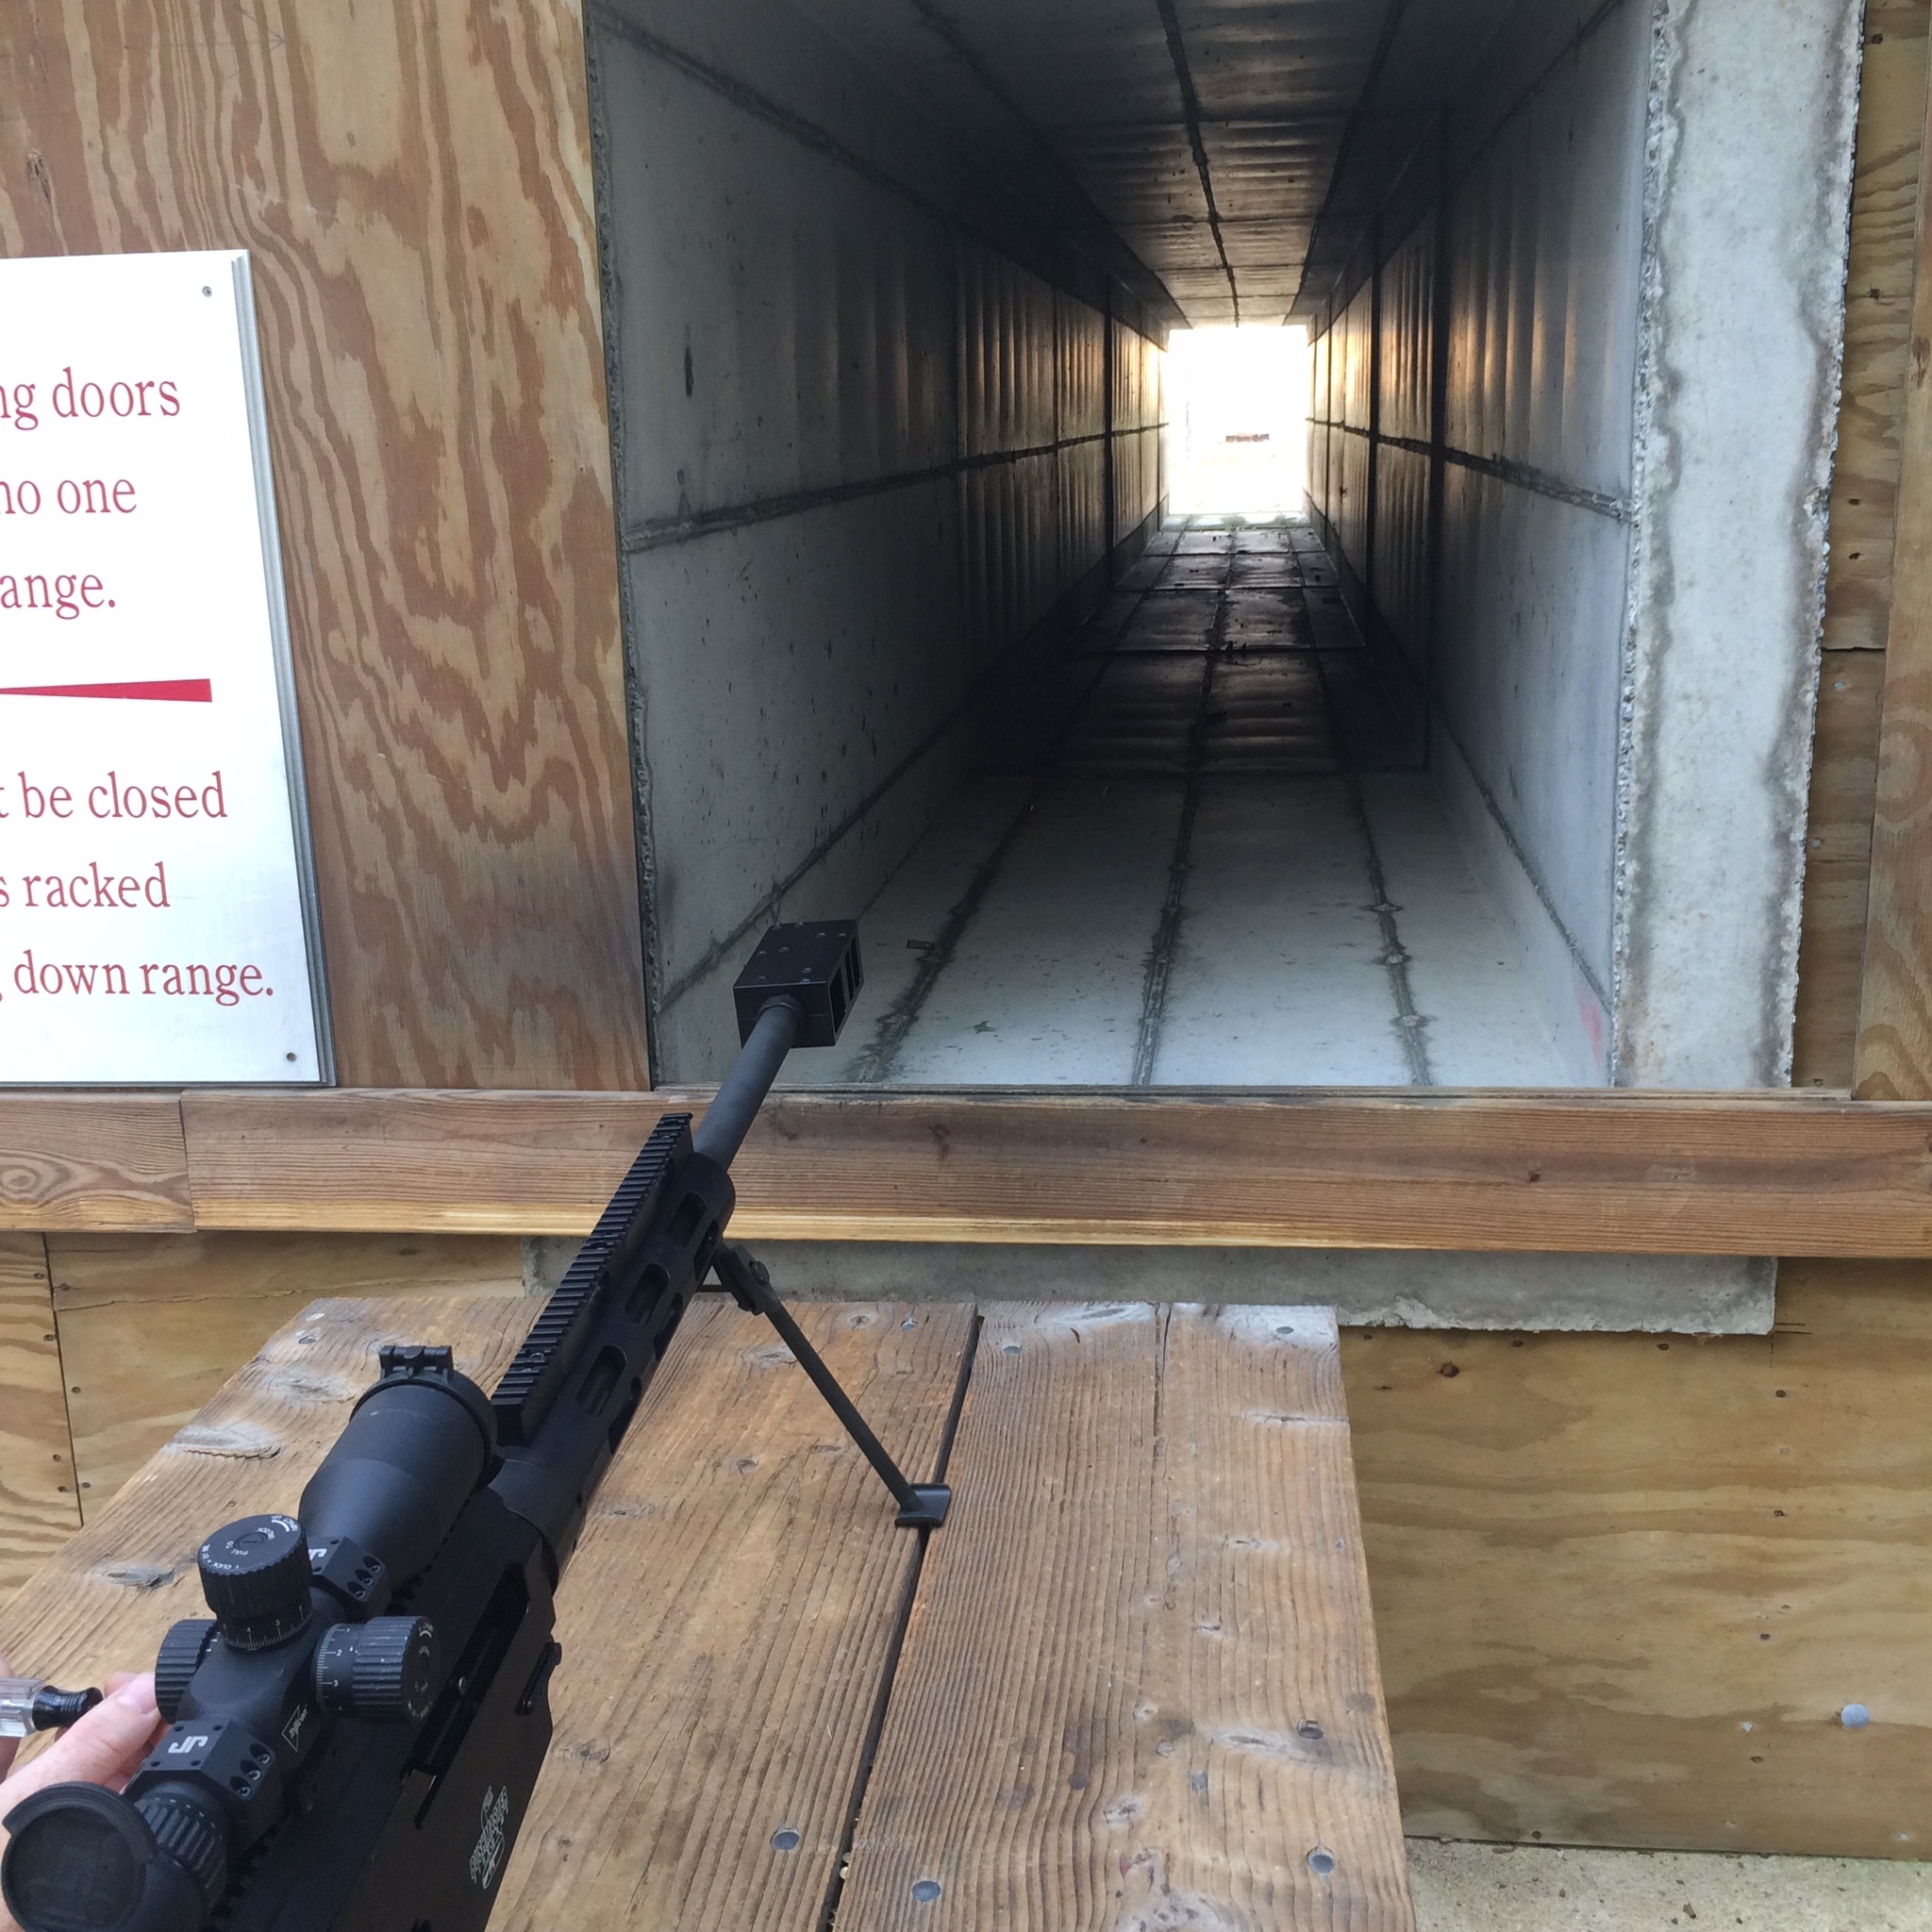 The concrete shooting tunnels intended to keep the trajectory of any shots fired on the rifle range in the target area.